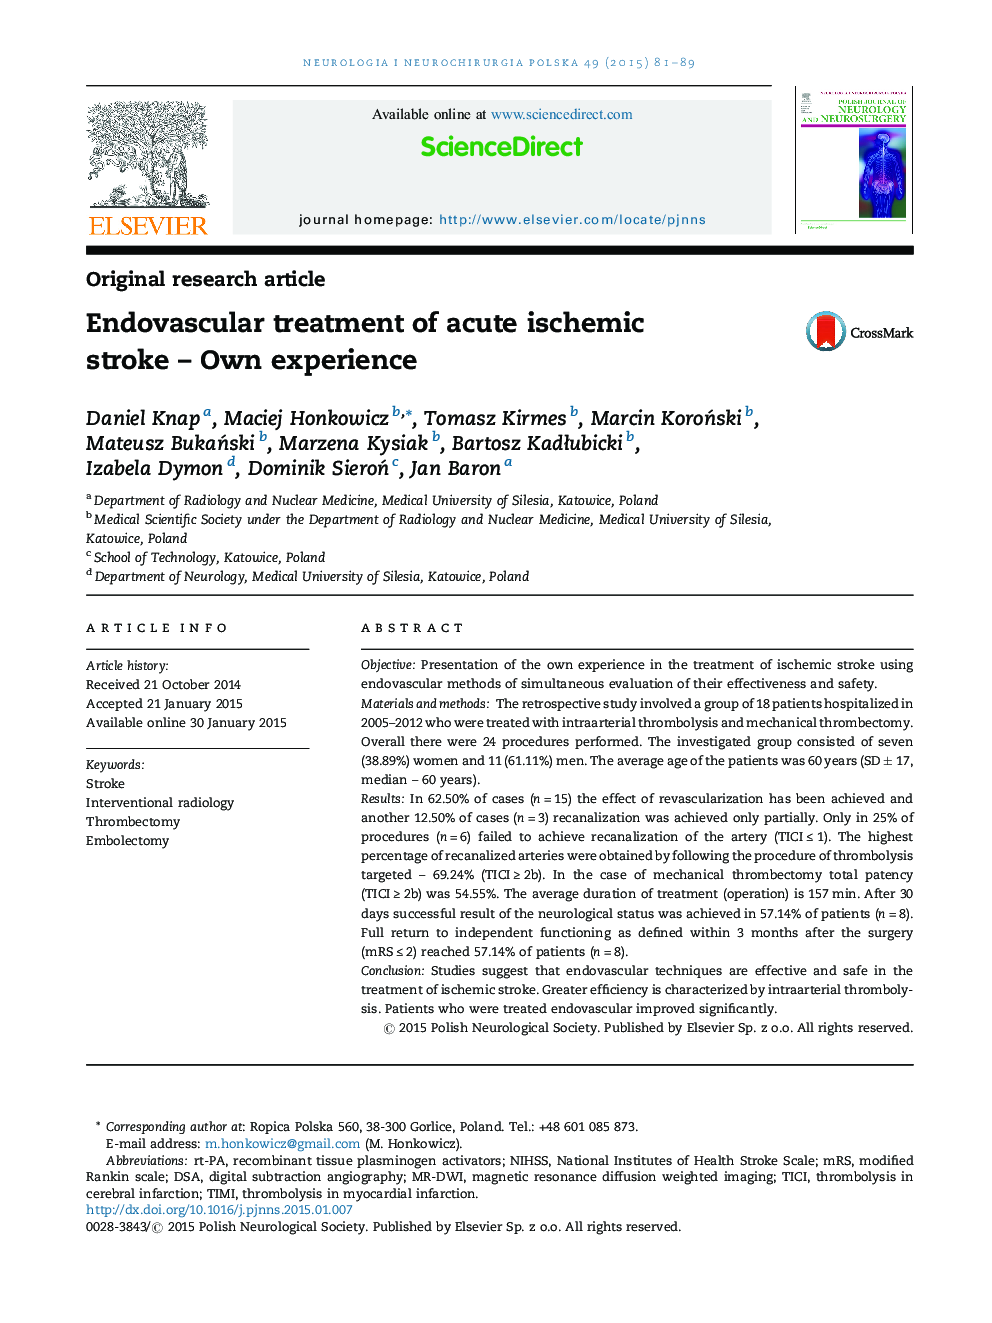 Endovascular treatment of acute ischemic stroke – Own experience